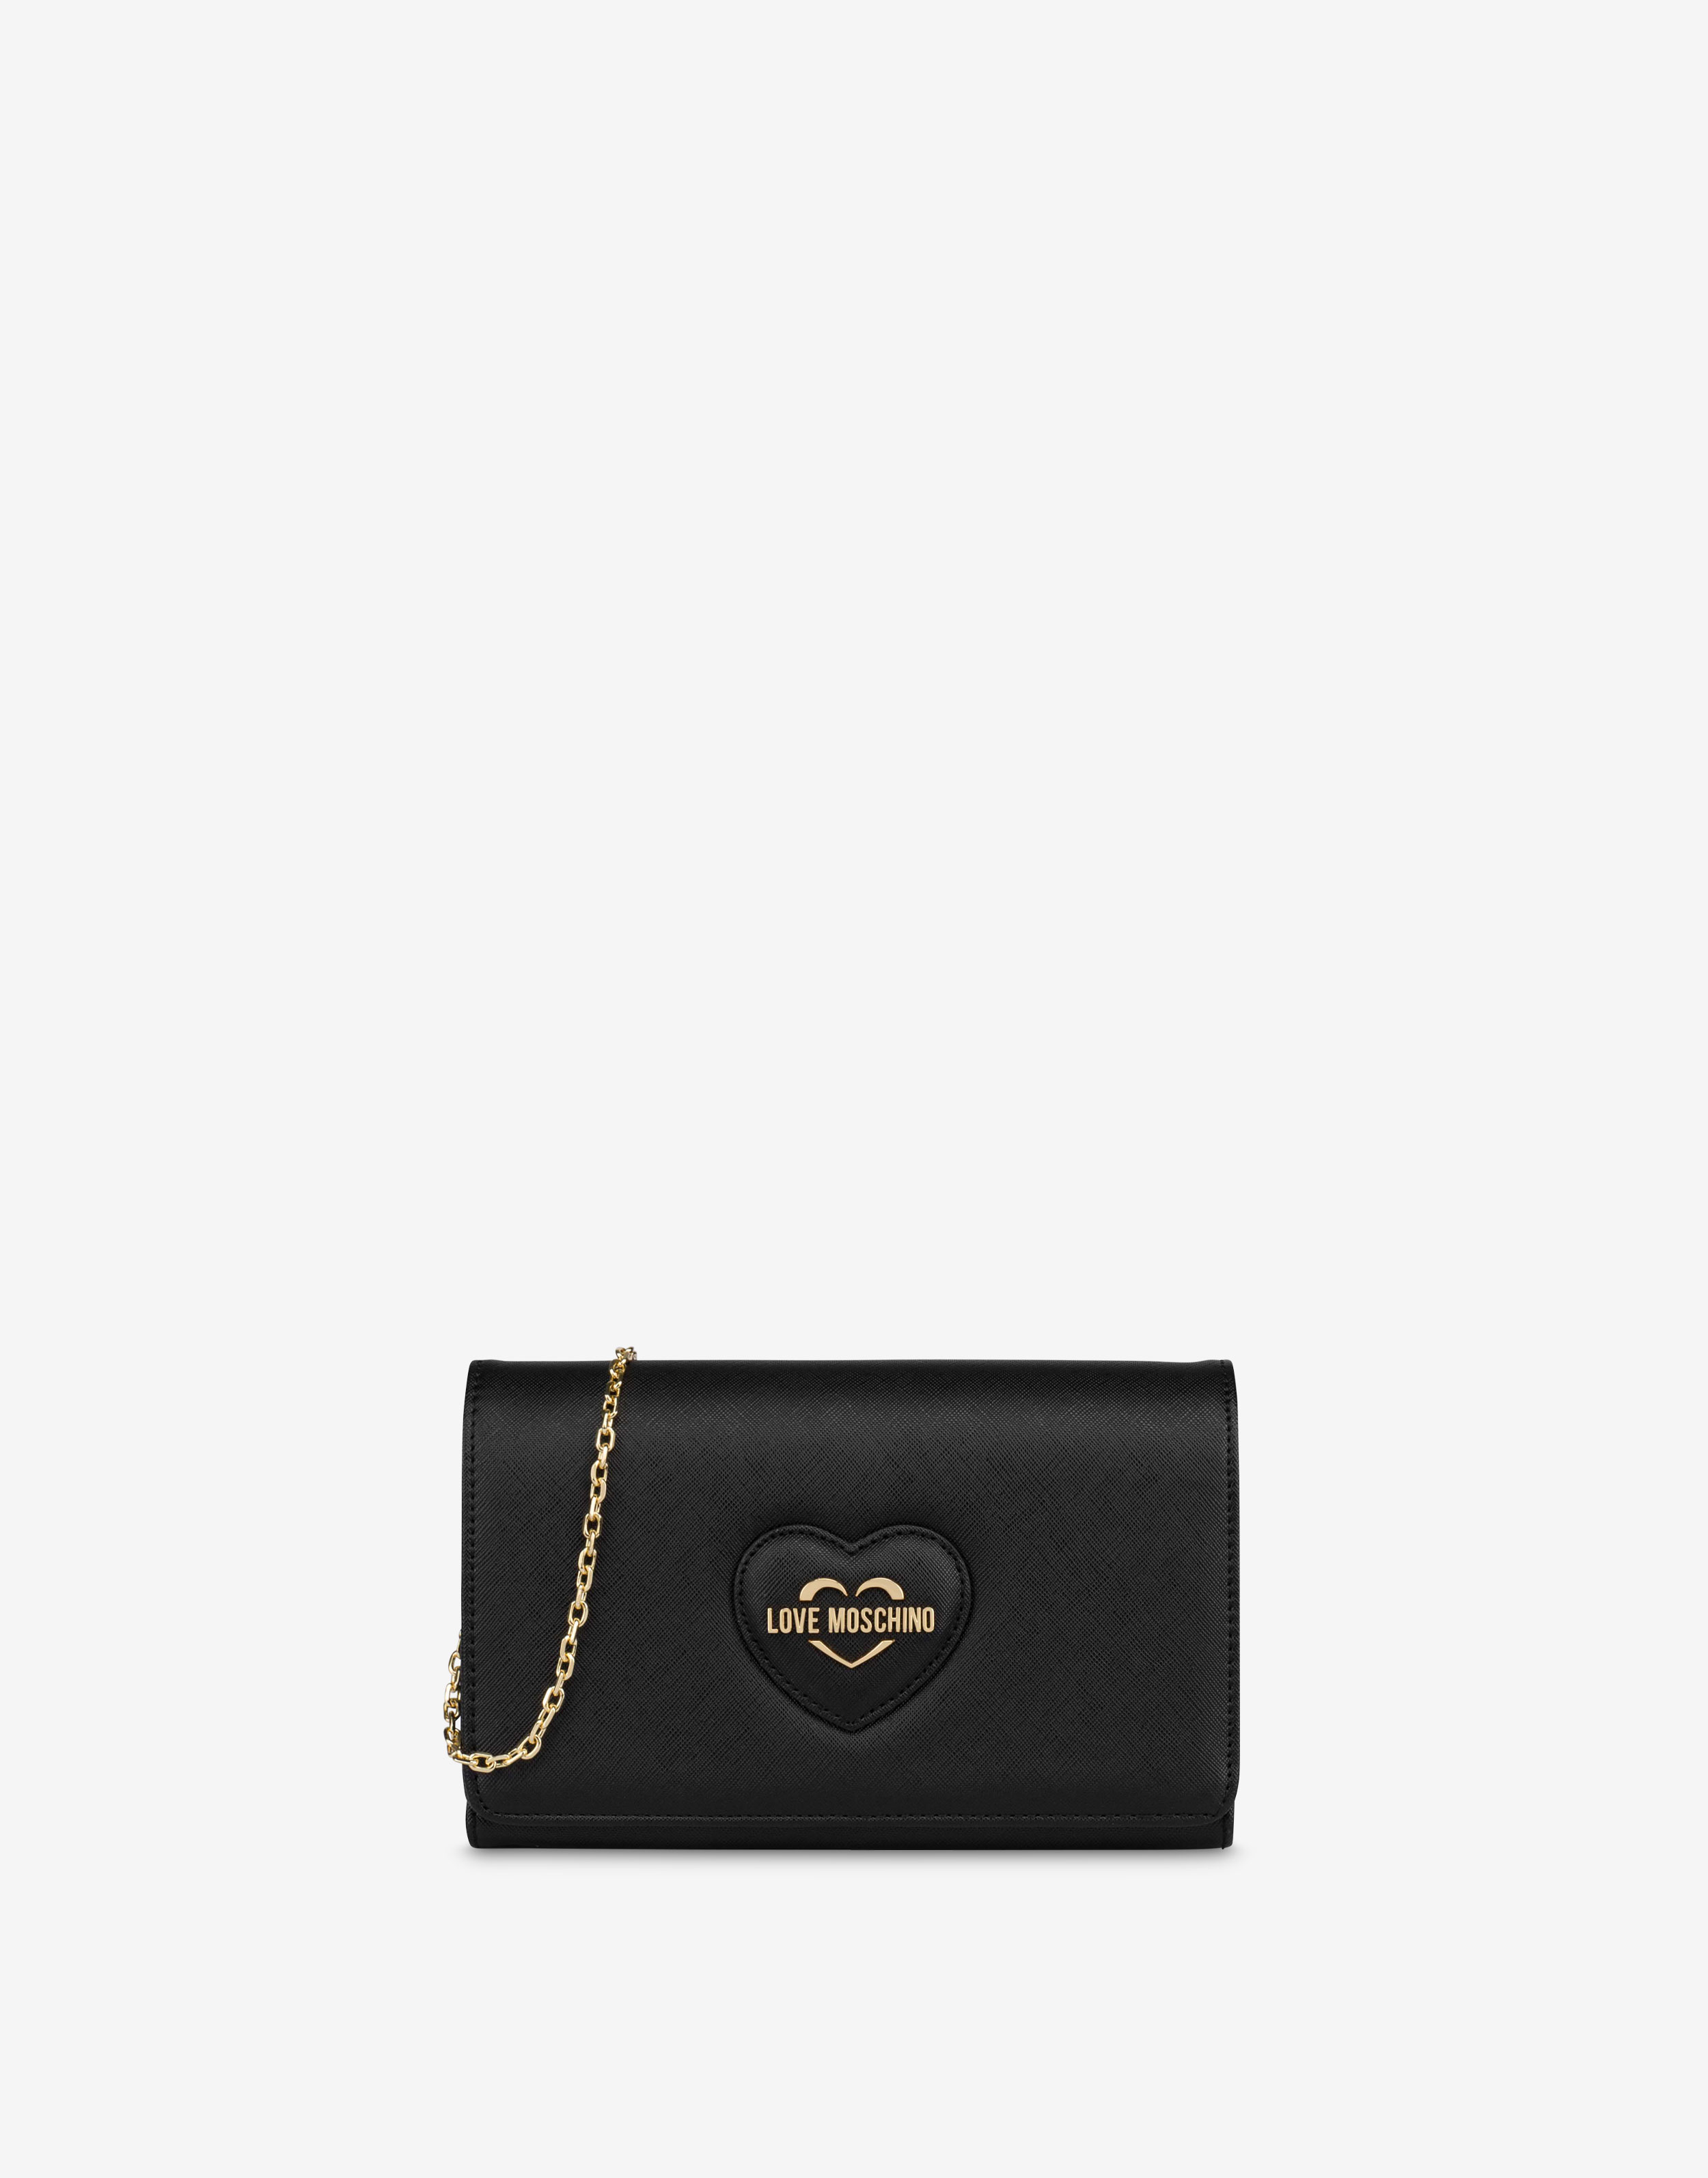 It's a Sale on Sale! This Moschino Bag Is 55% Off at YOOX | Us Weekly